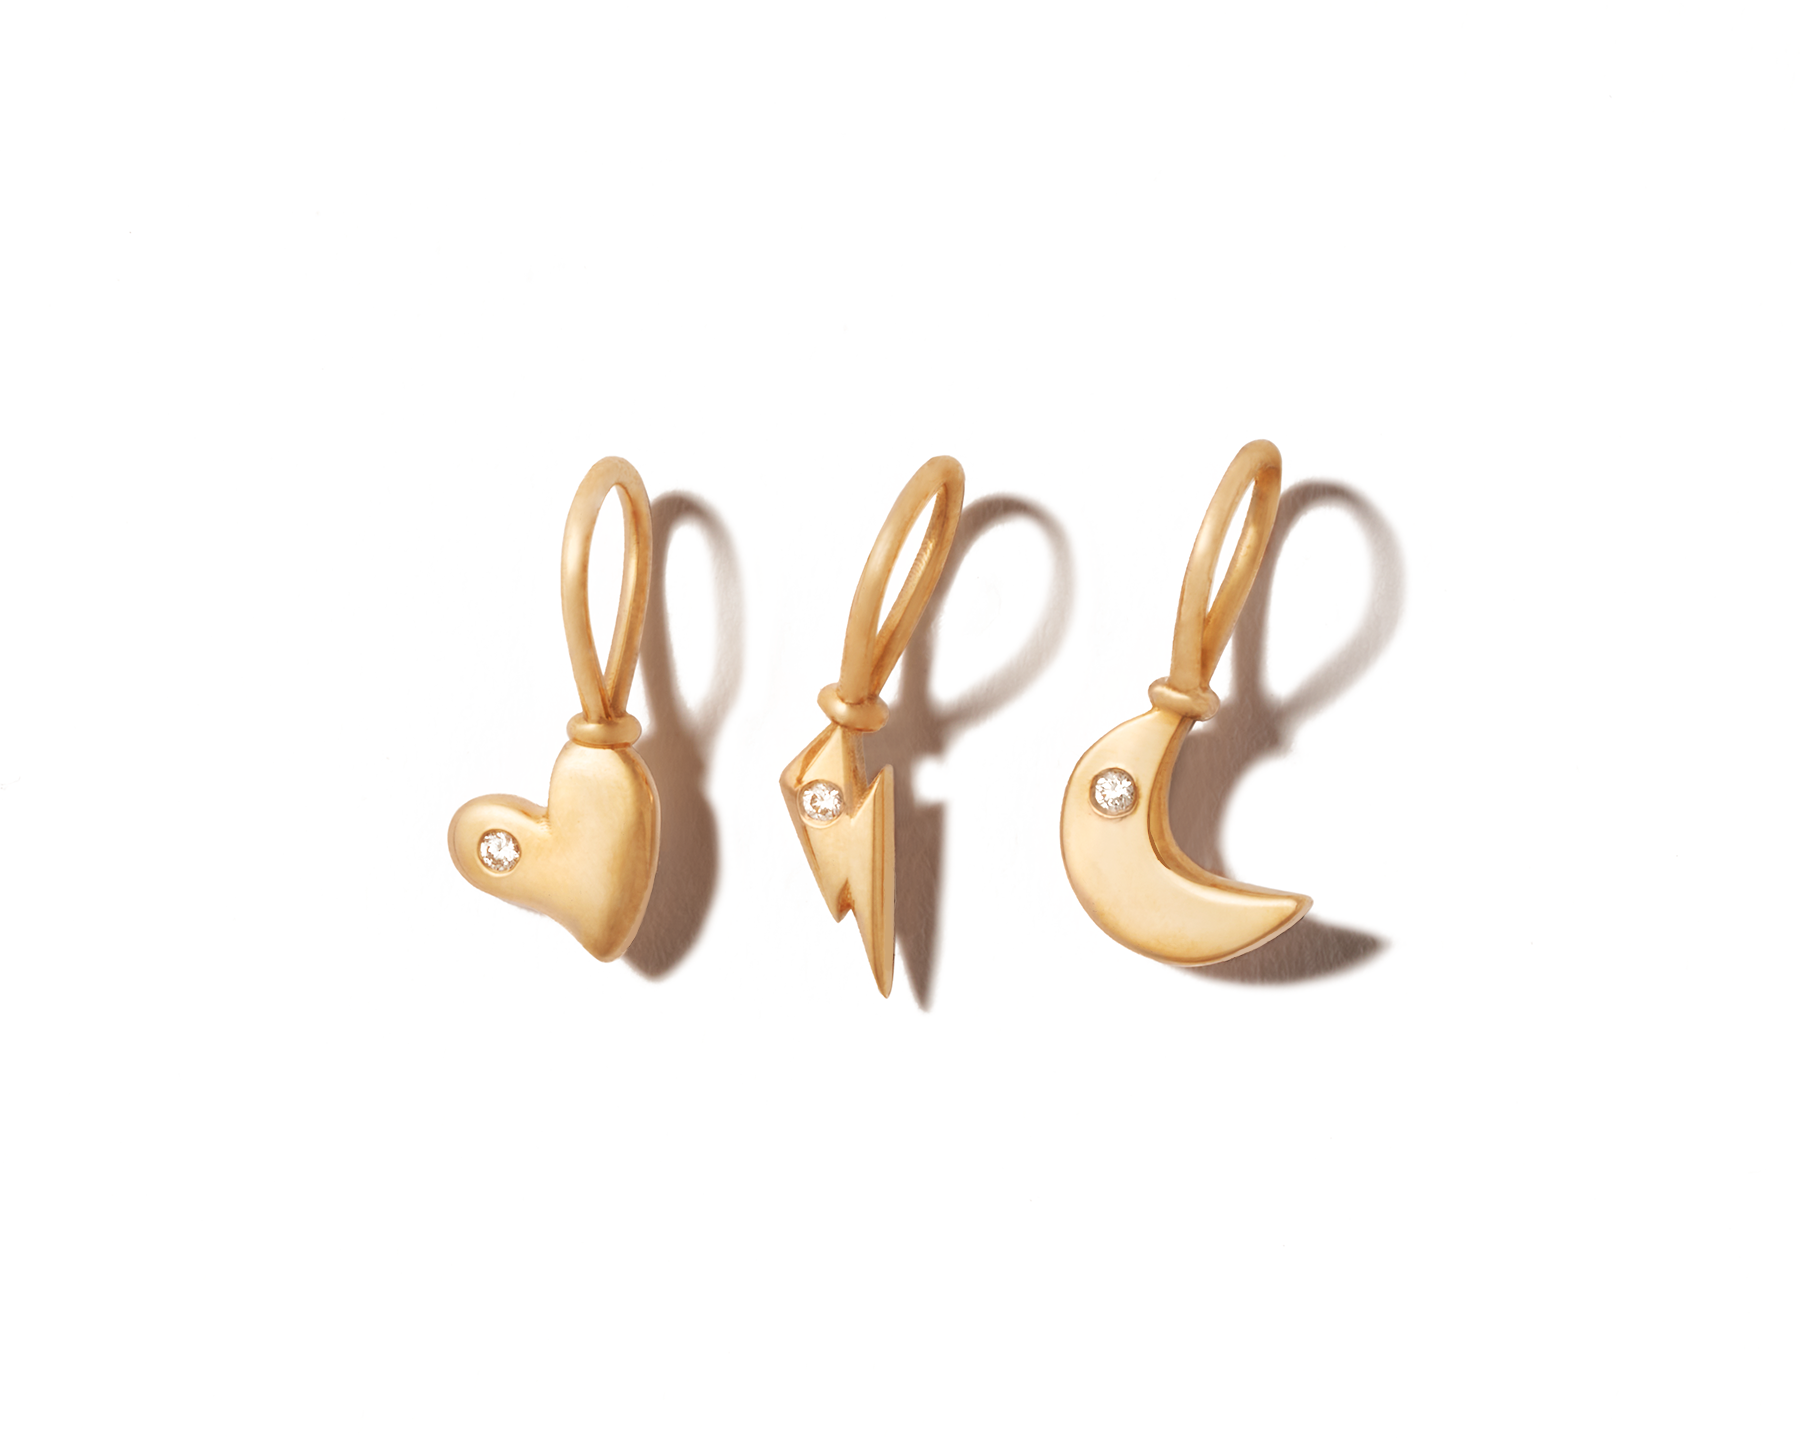 Three tiny gold charms lined up